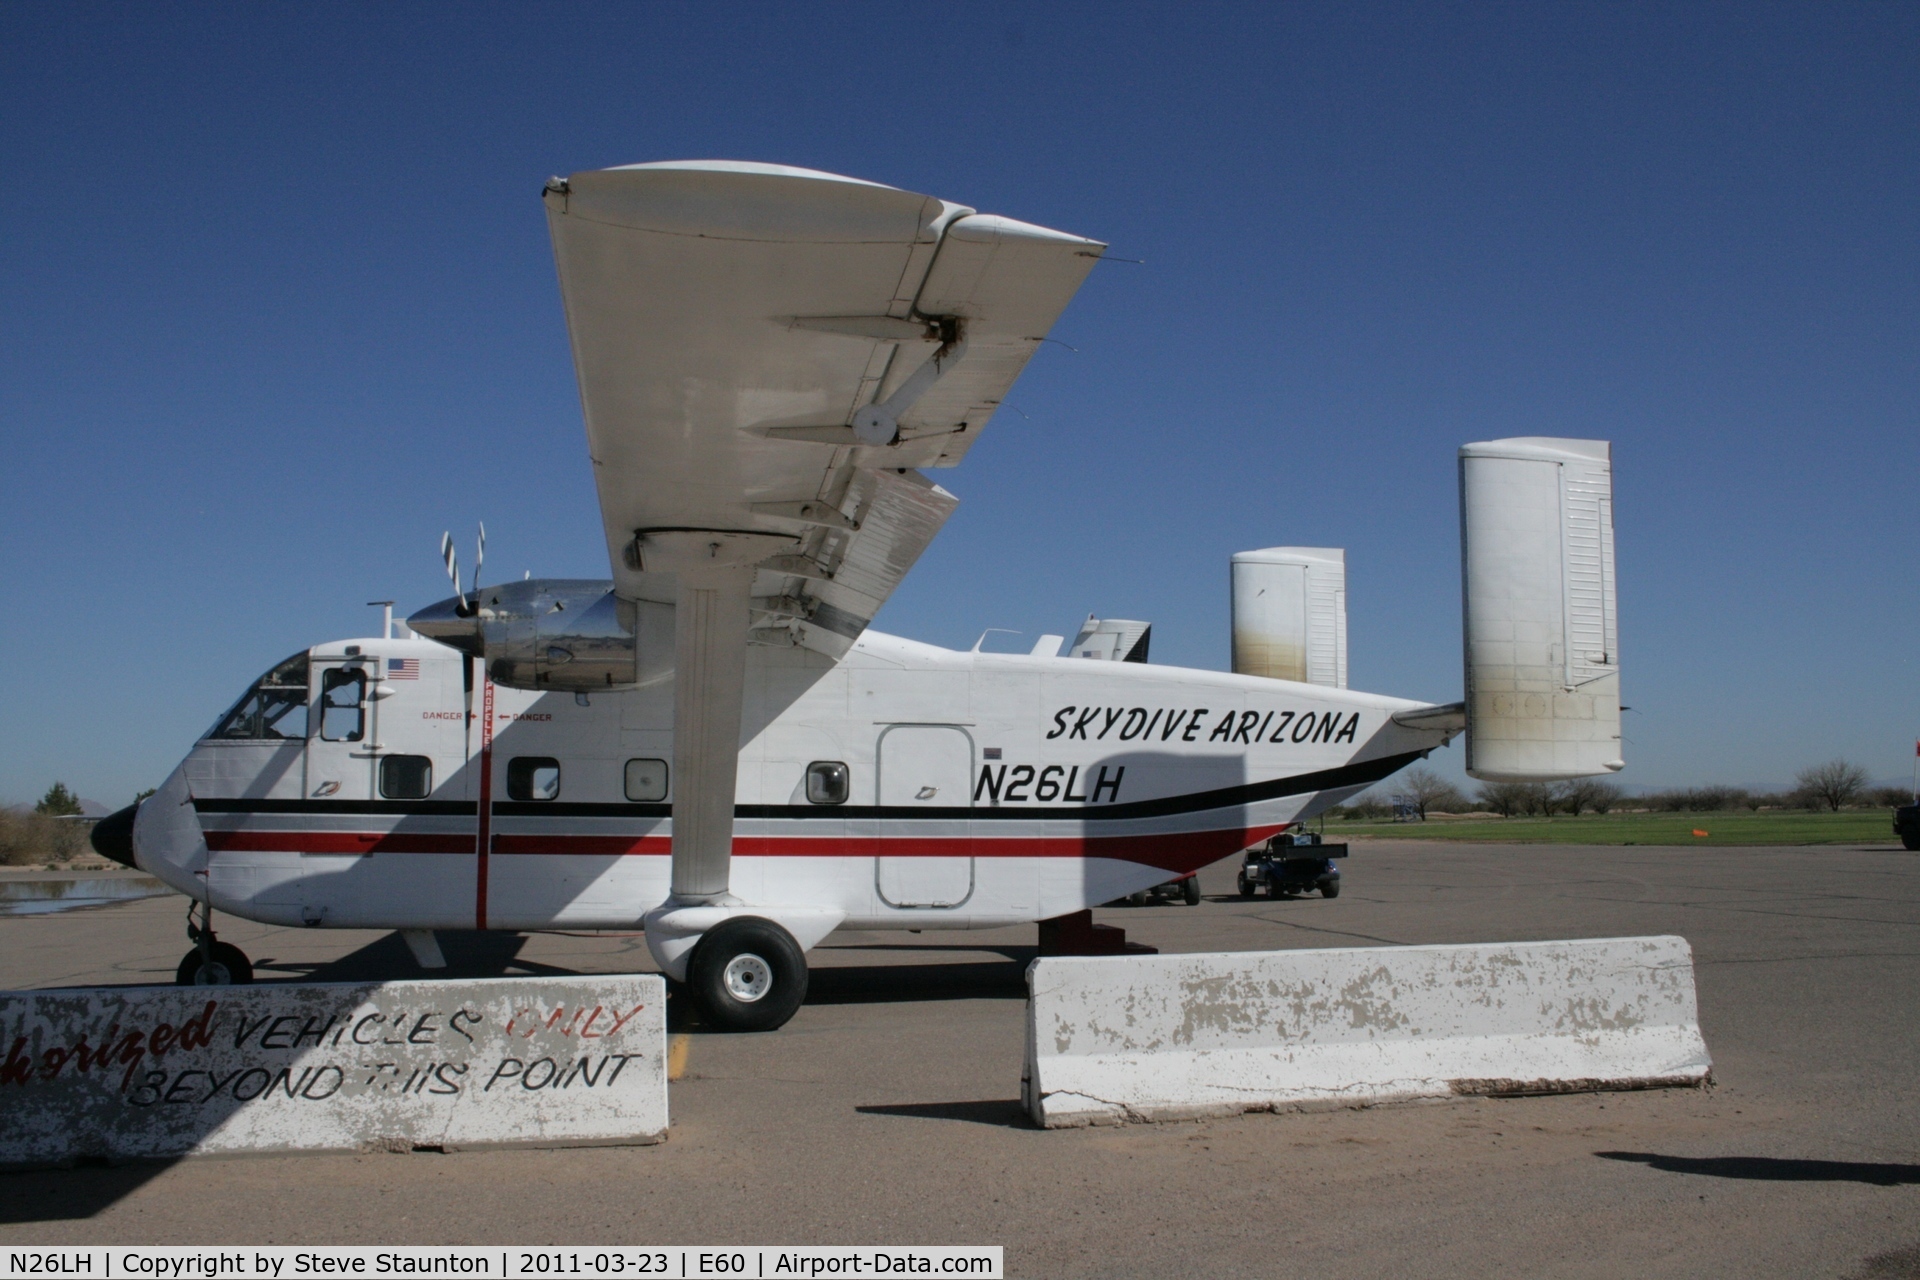 N26LH, 1974 Short SC-7 Skyvan C/N SH.1925, Taken at Eloy Airport, in March 2011 whilst on an Aeroprint Aviation tour